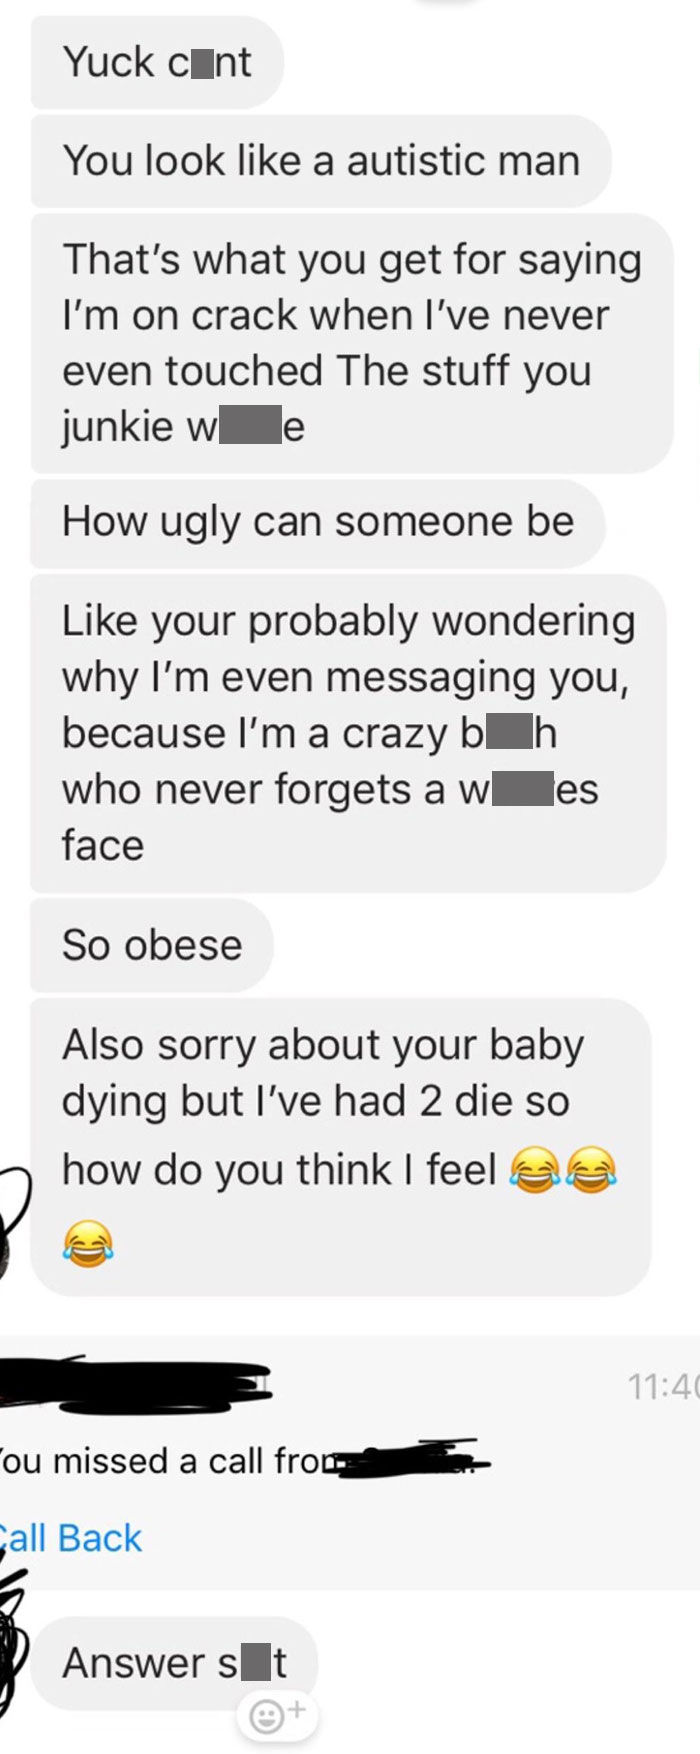 My Sister Got This Message From My Ex. We Haven’t Spoken To Her In Over 5 Years